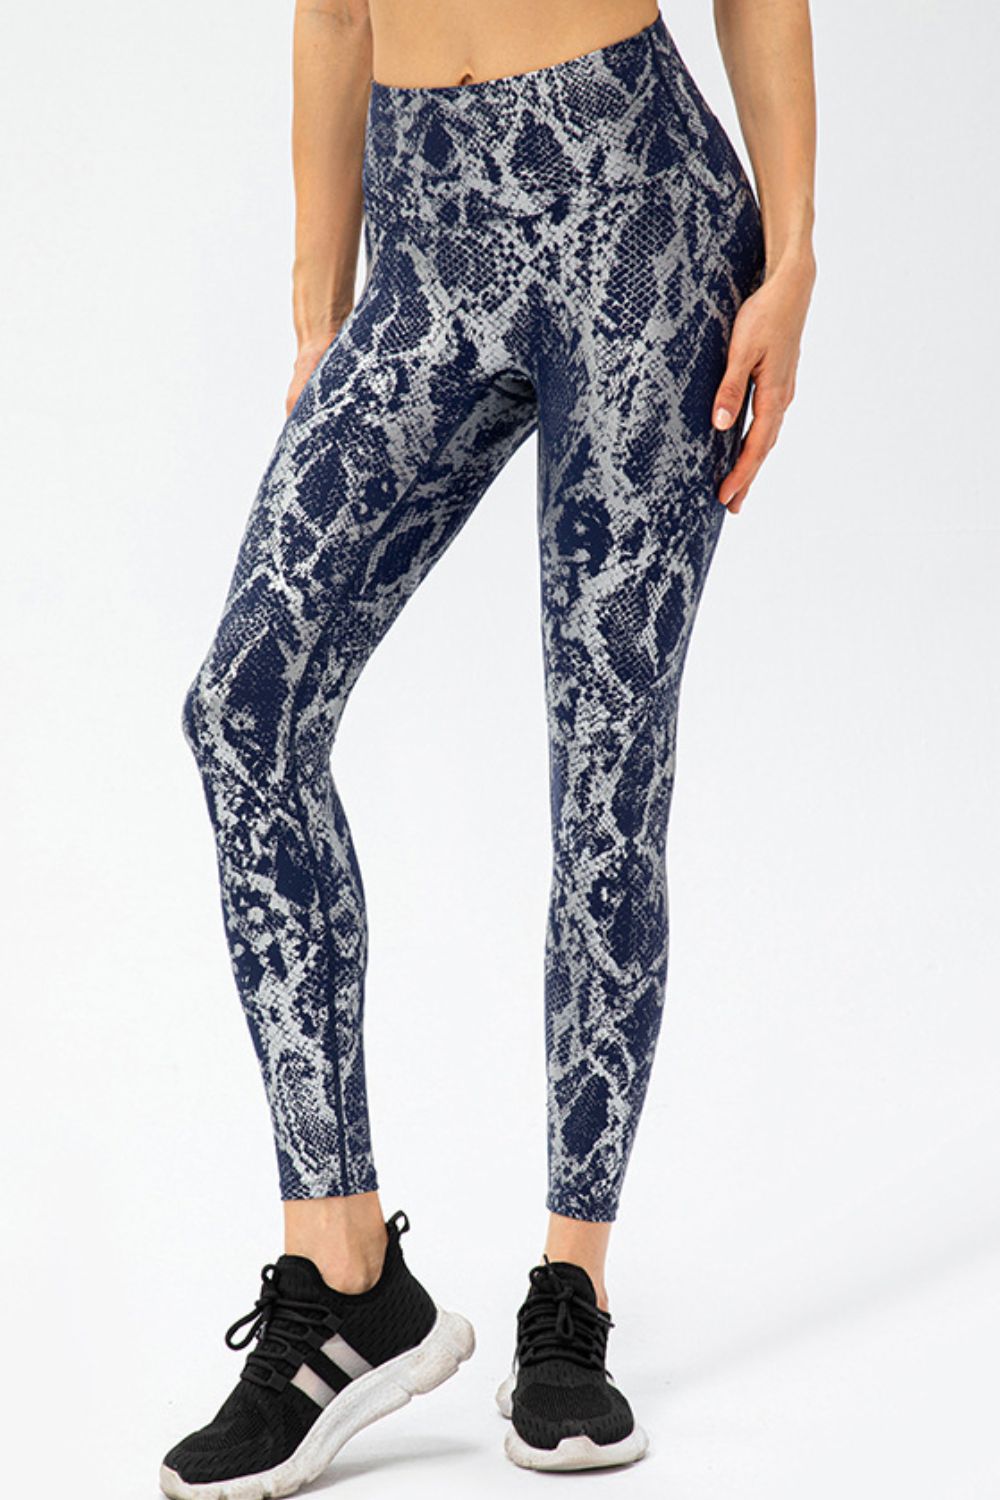 Animal Print Slim Fit Wide Waistband Long Sports Pants Print on any thing USA/STOD clothes